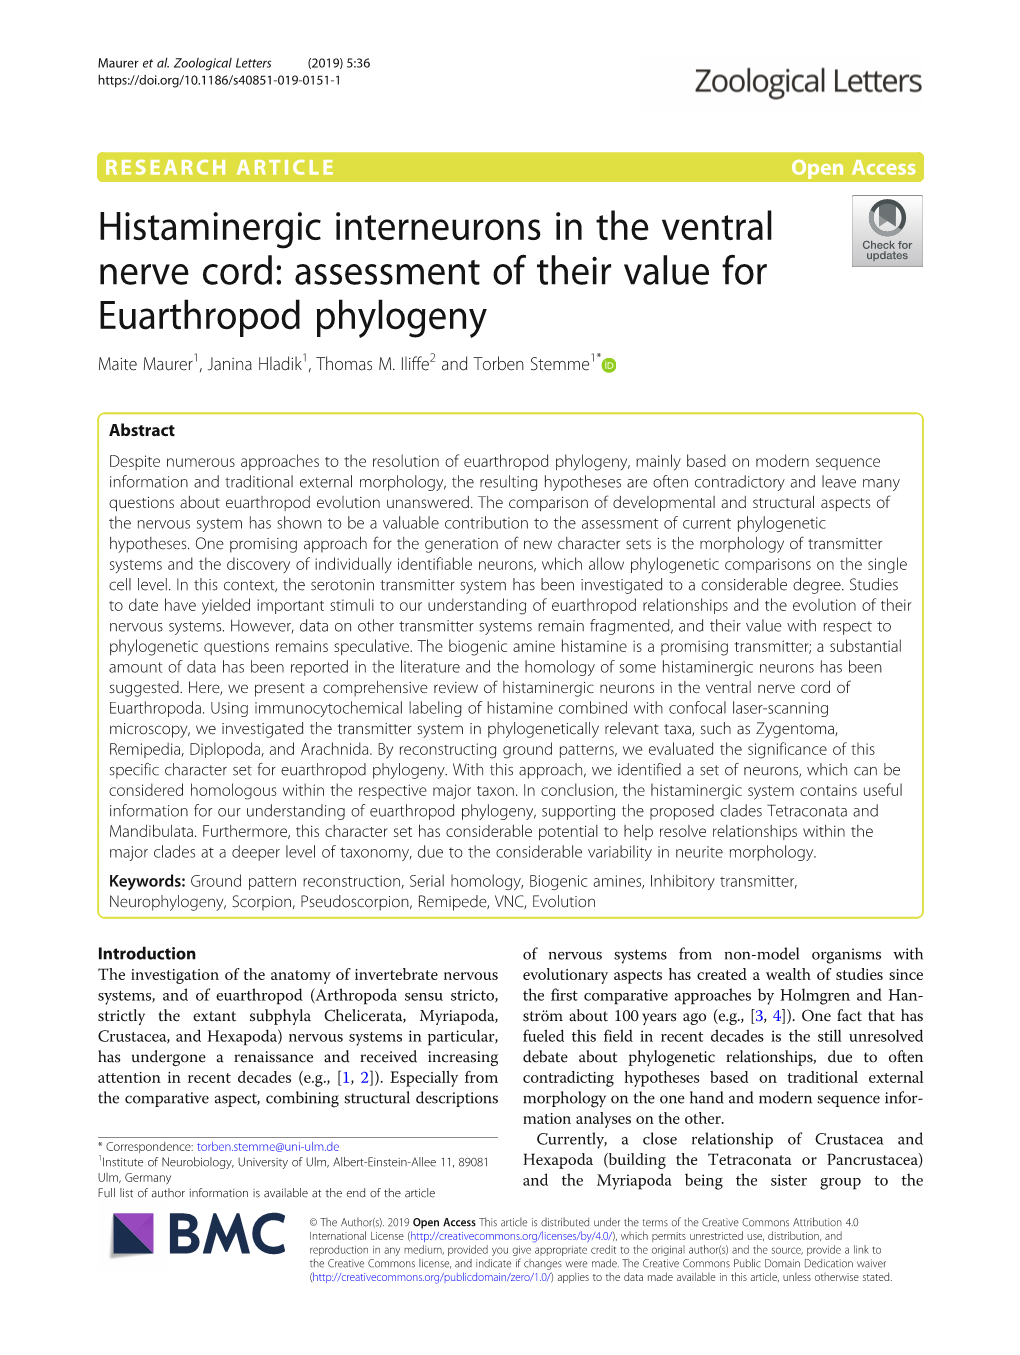 Histaminergic Interneurons in the Ventral Nerve Cord: Assessment of Their Value for Euarthropod Phylogeny Maite Maurer1, Janina Hladik1, Thomas M